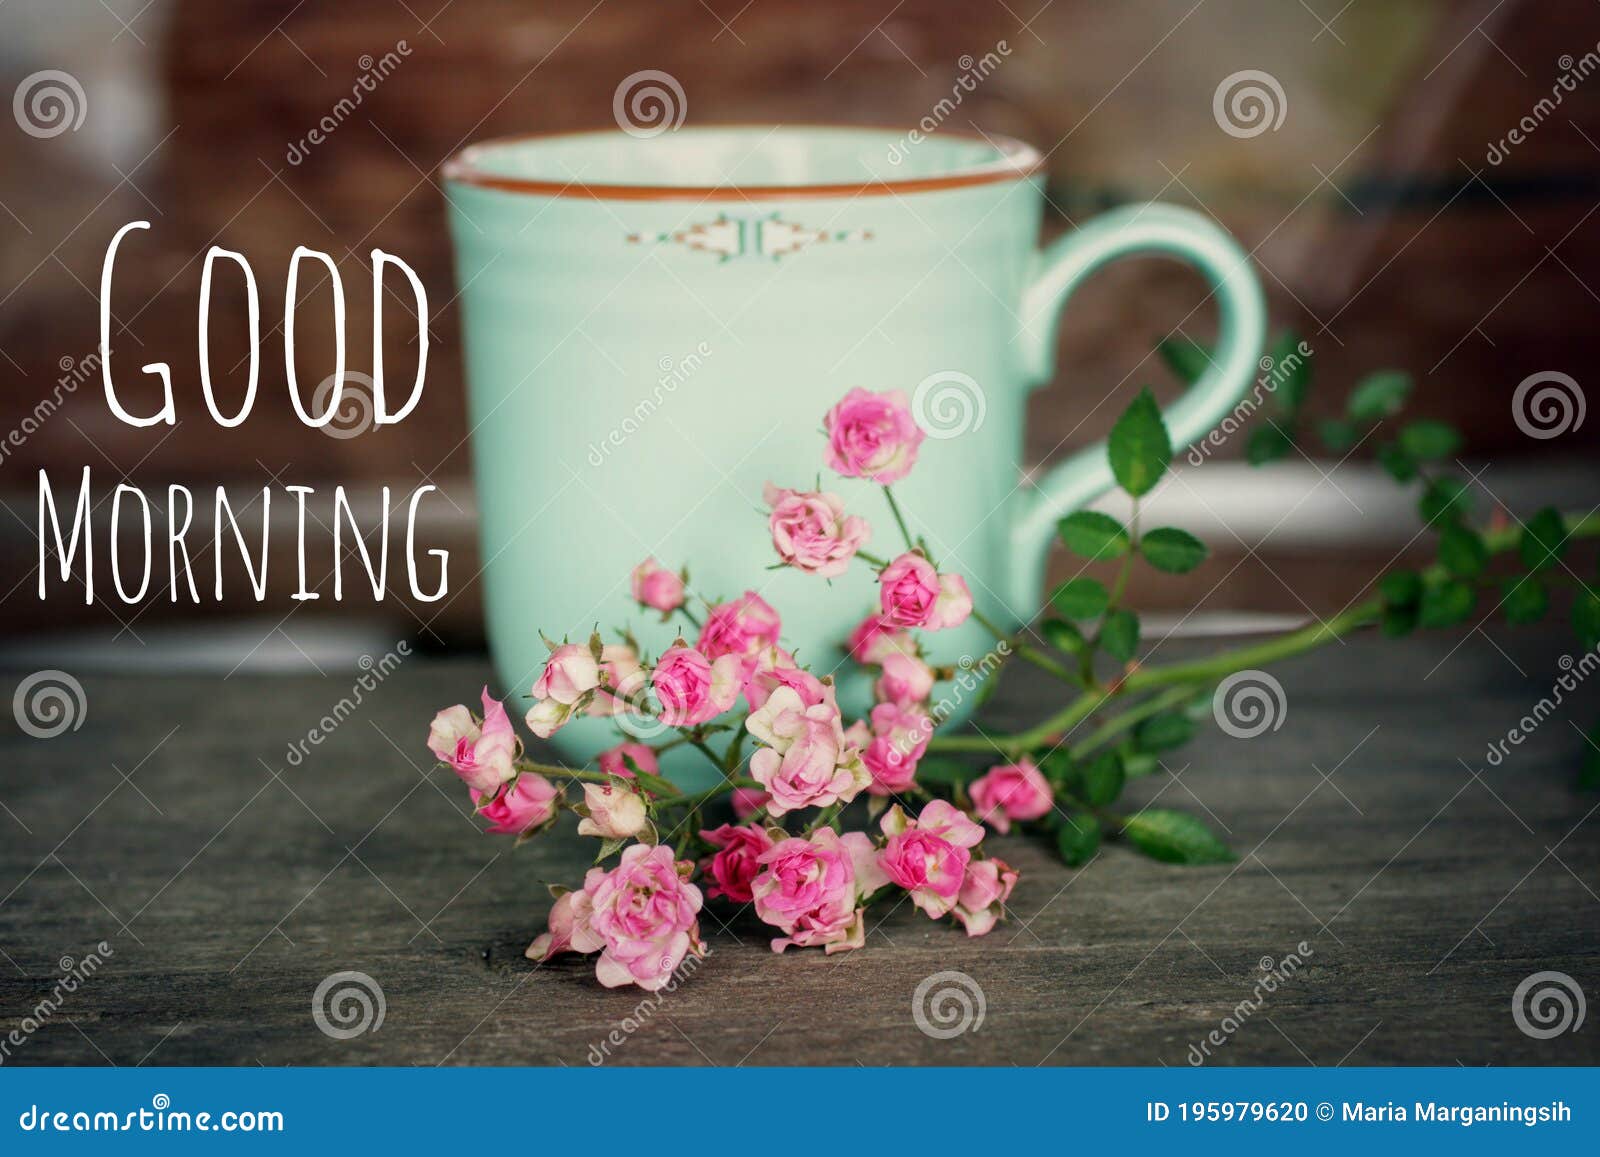 Morning Greeting Text Message with a Cup of Morning Coffee or Tea ...